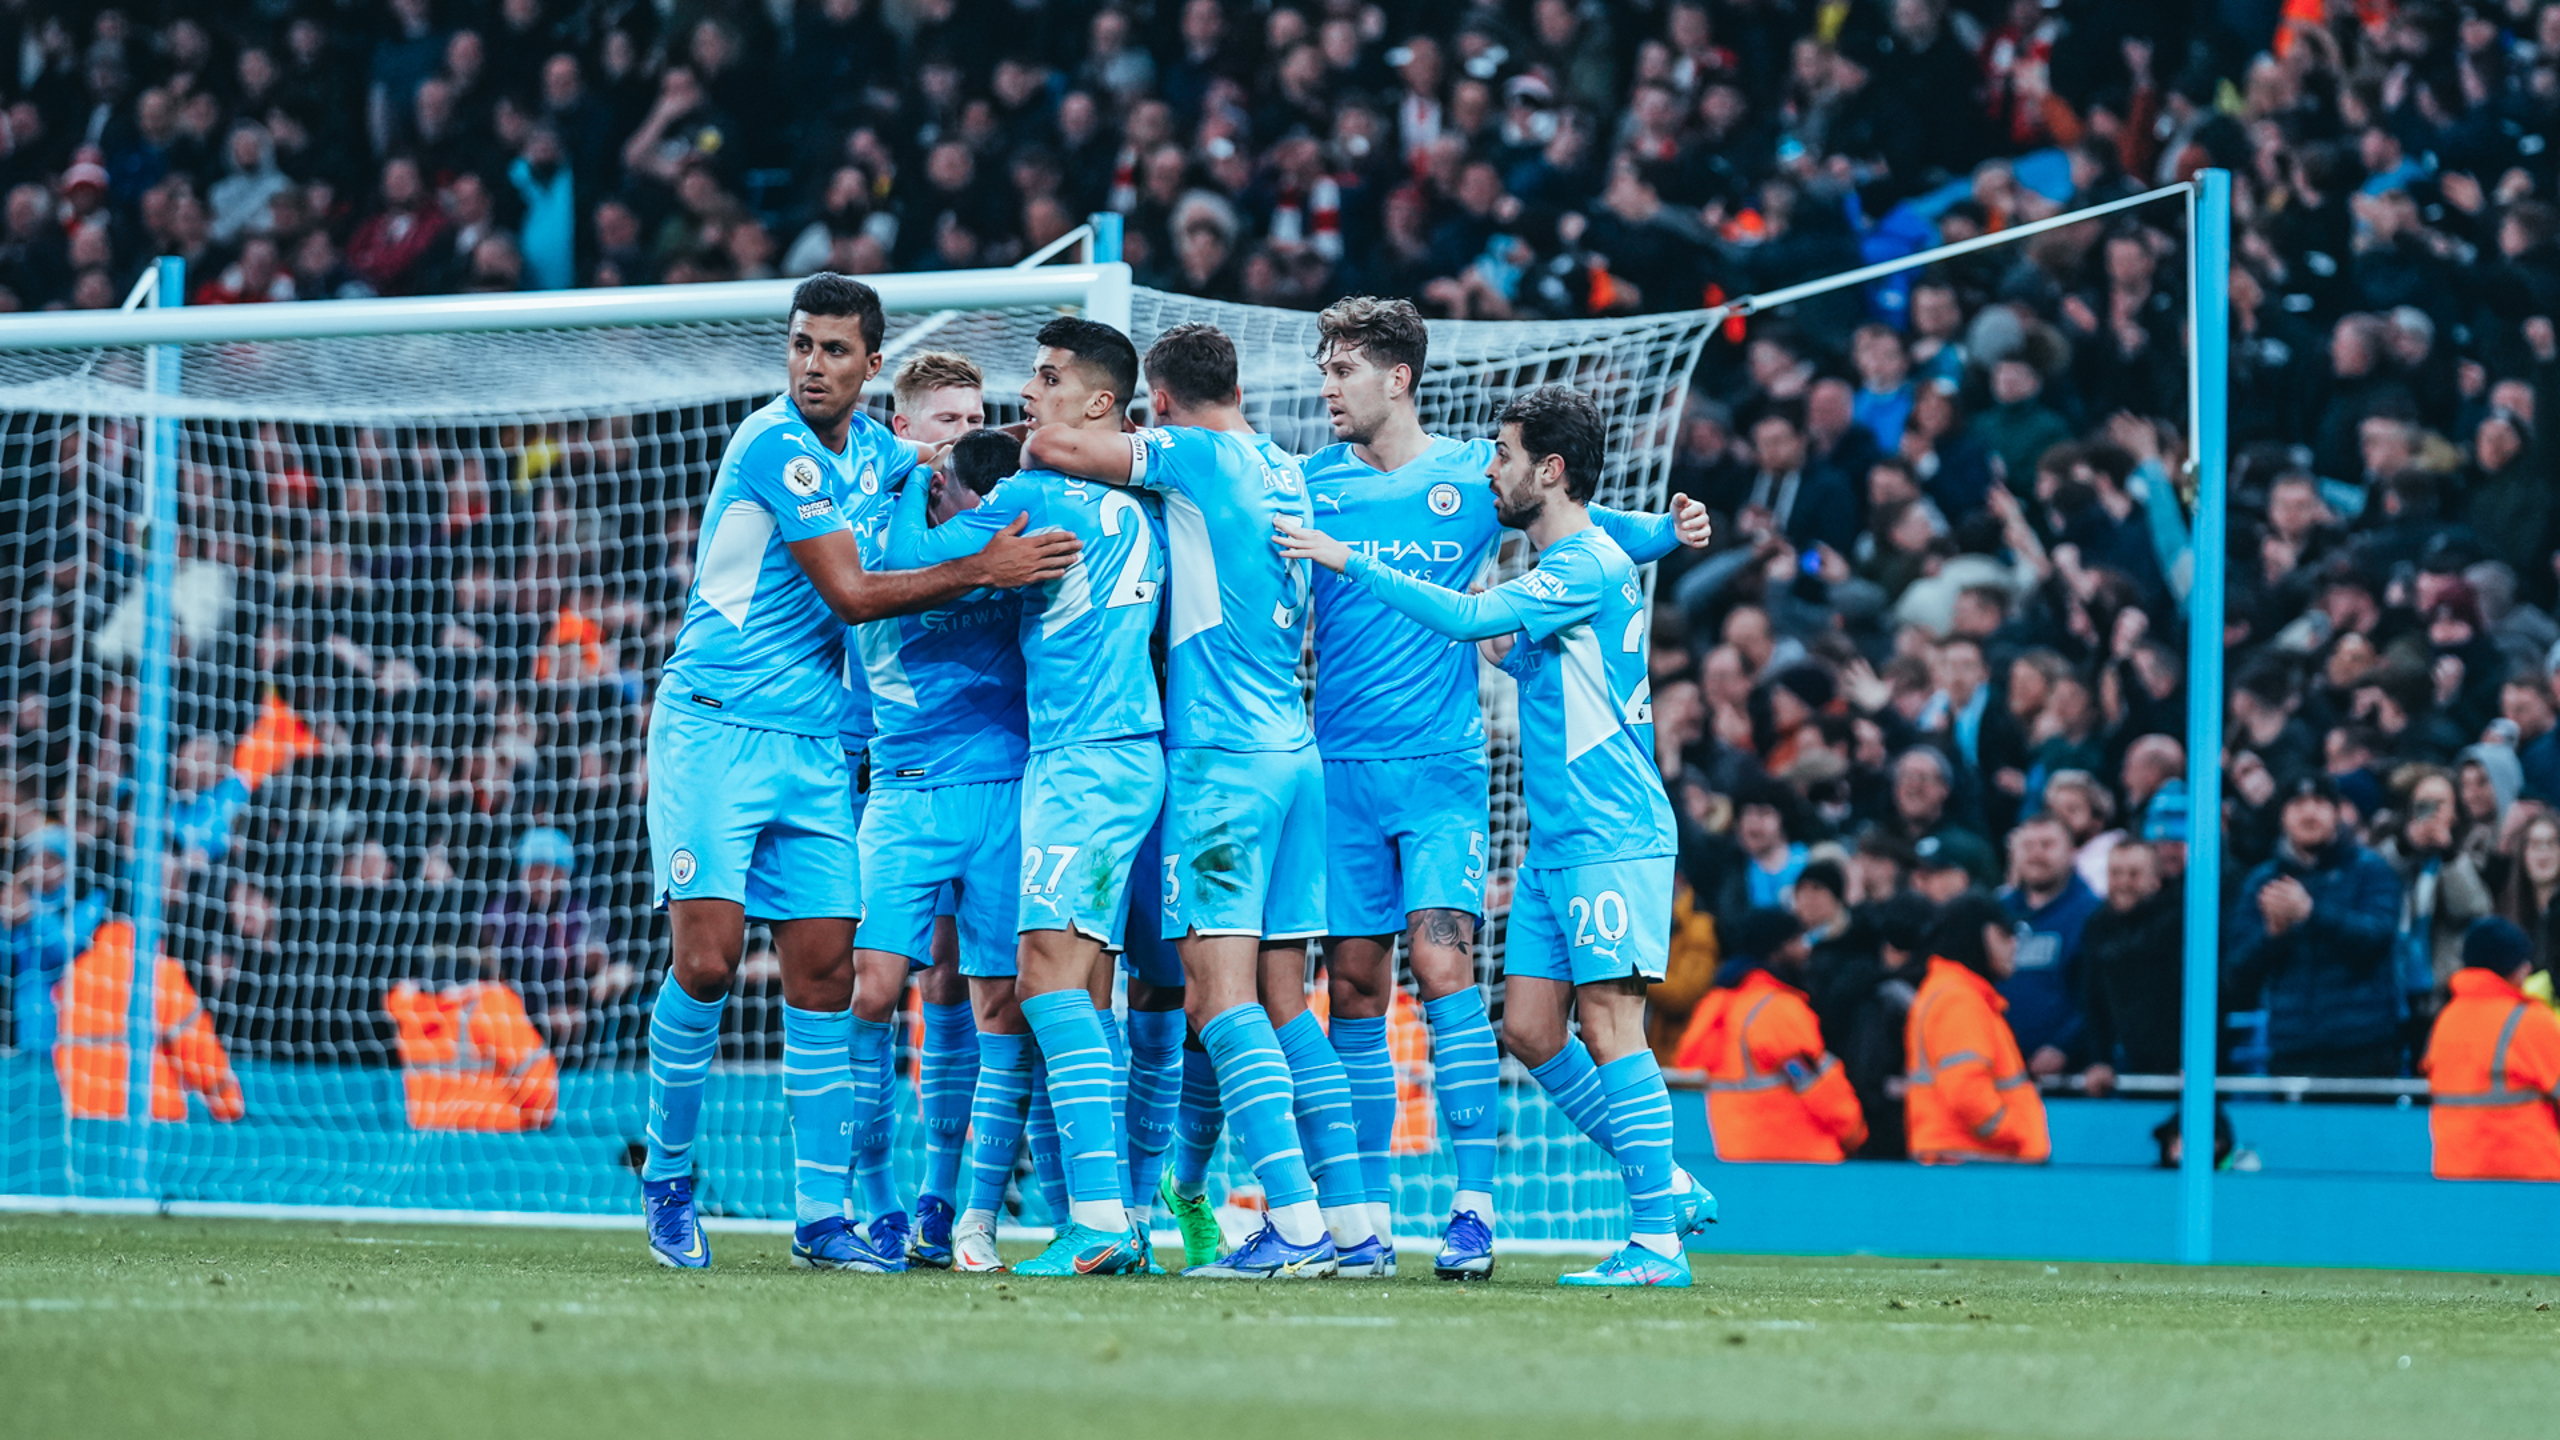 City overcome Brentford to extend our Premier League lead